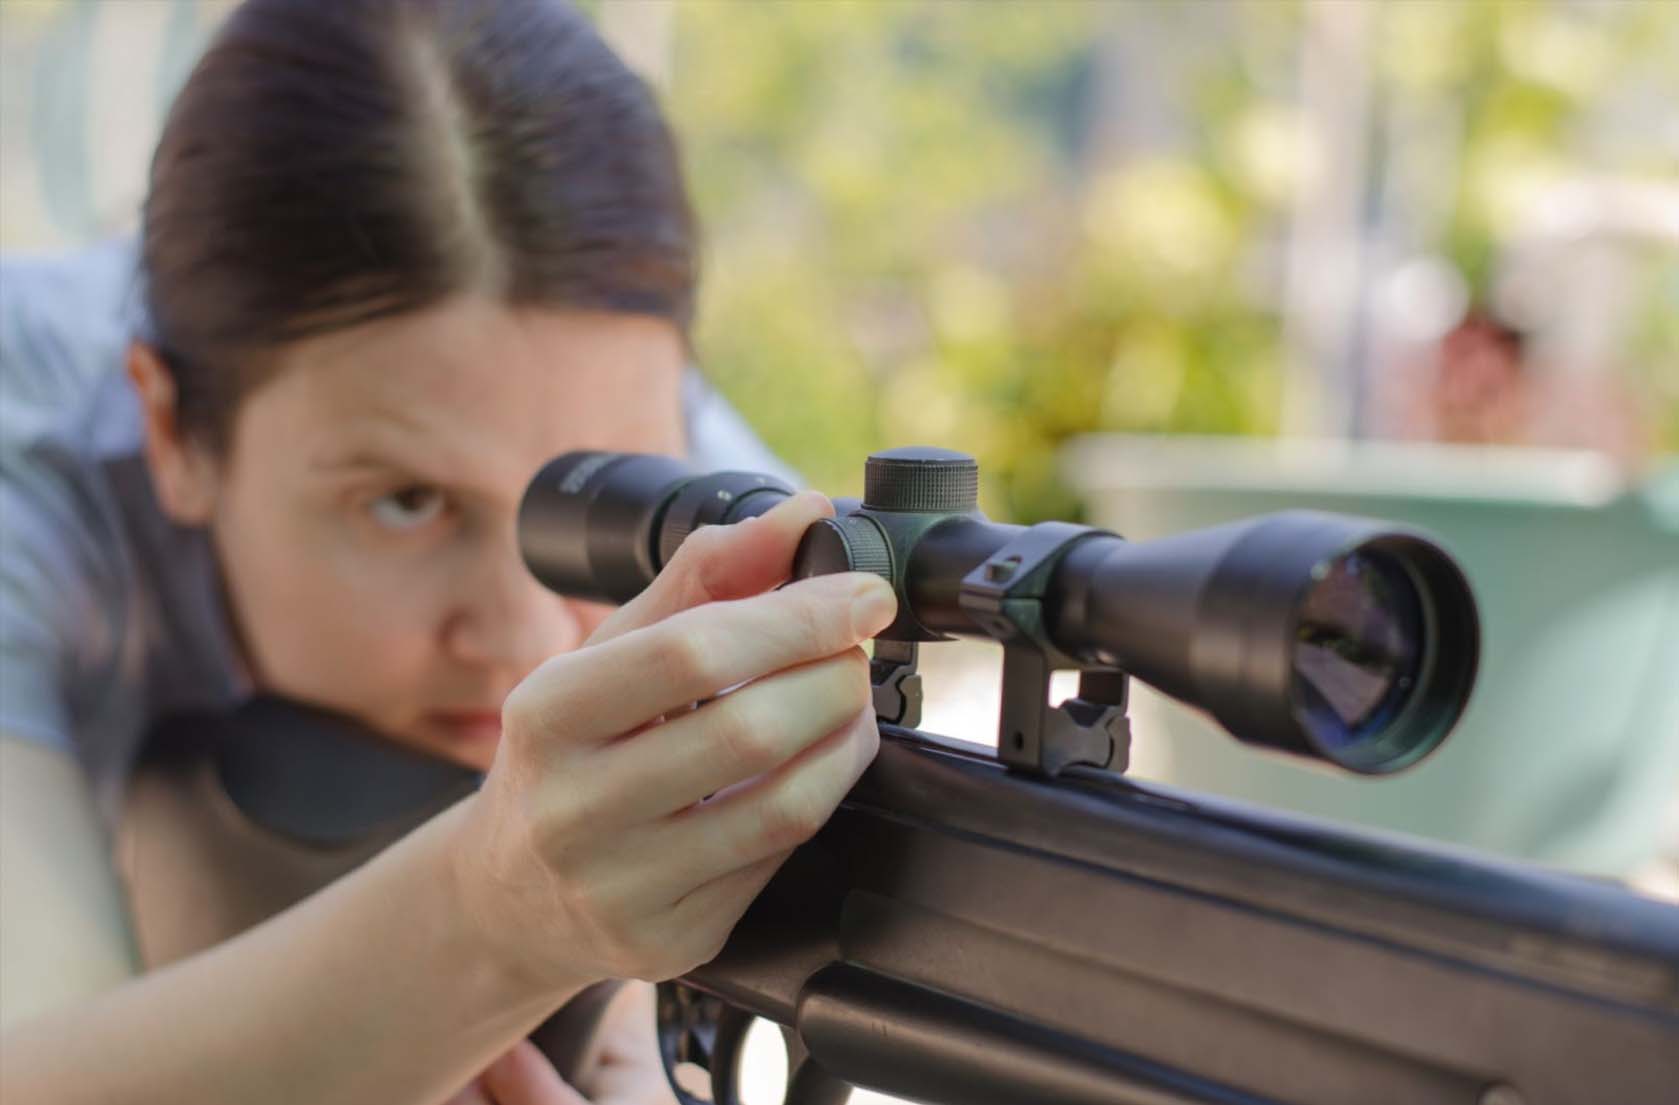 A female sniper carefully calibrates her rifle's scope, peering intently through the optical sight for precision adjustment.